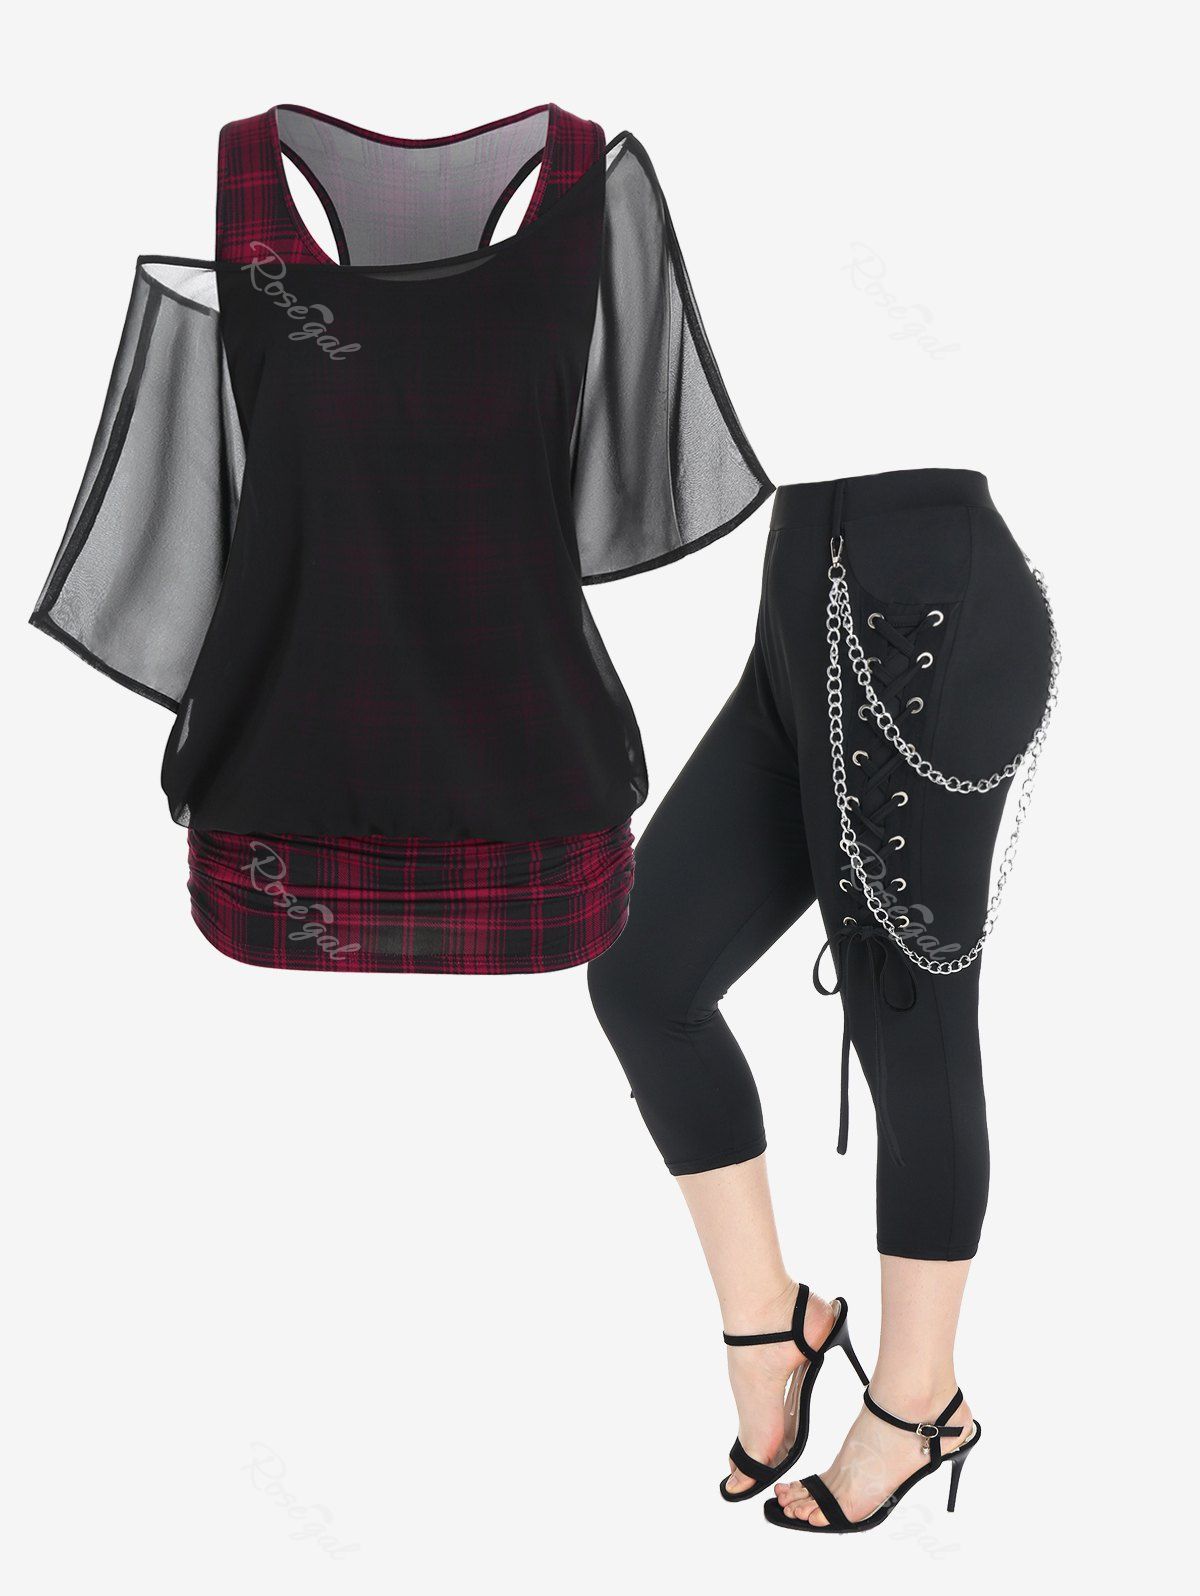 Sale Skew Neck Sheer Mesh Blouse and Plaid Ruched Tank Top and Punk High Waist Lace Up Chains Capri Pants Set Plus Size Summer Outfit  